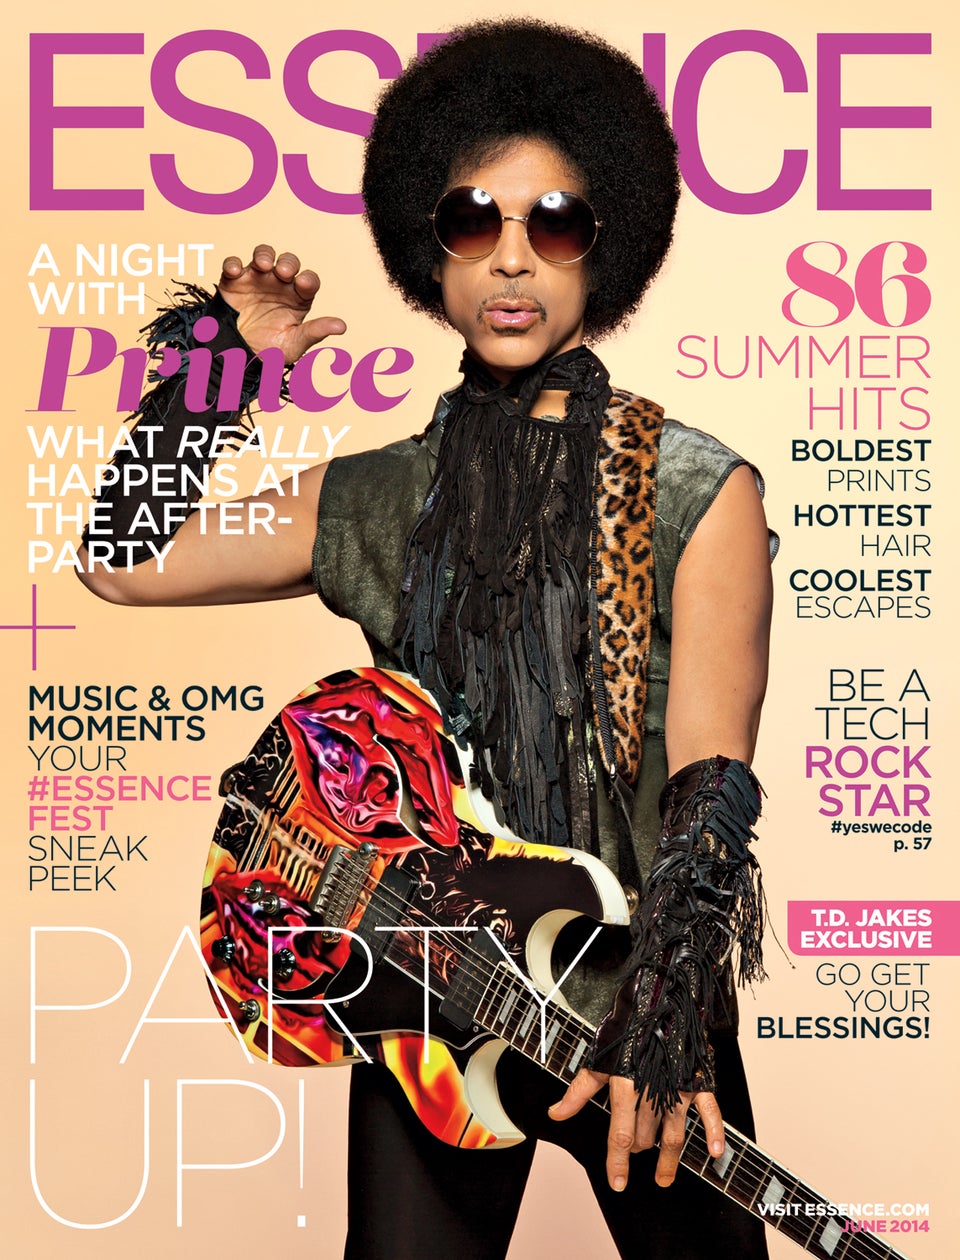 A Rare Prince Interview From the ESSENCE Archives